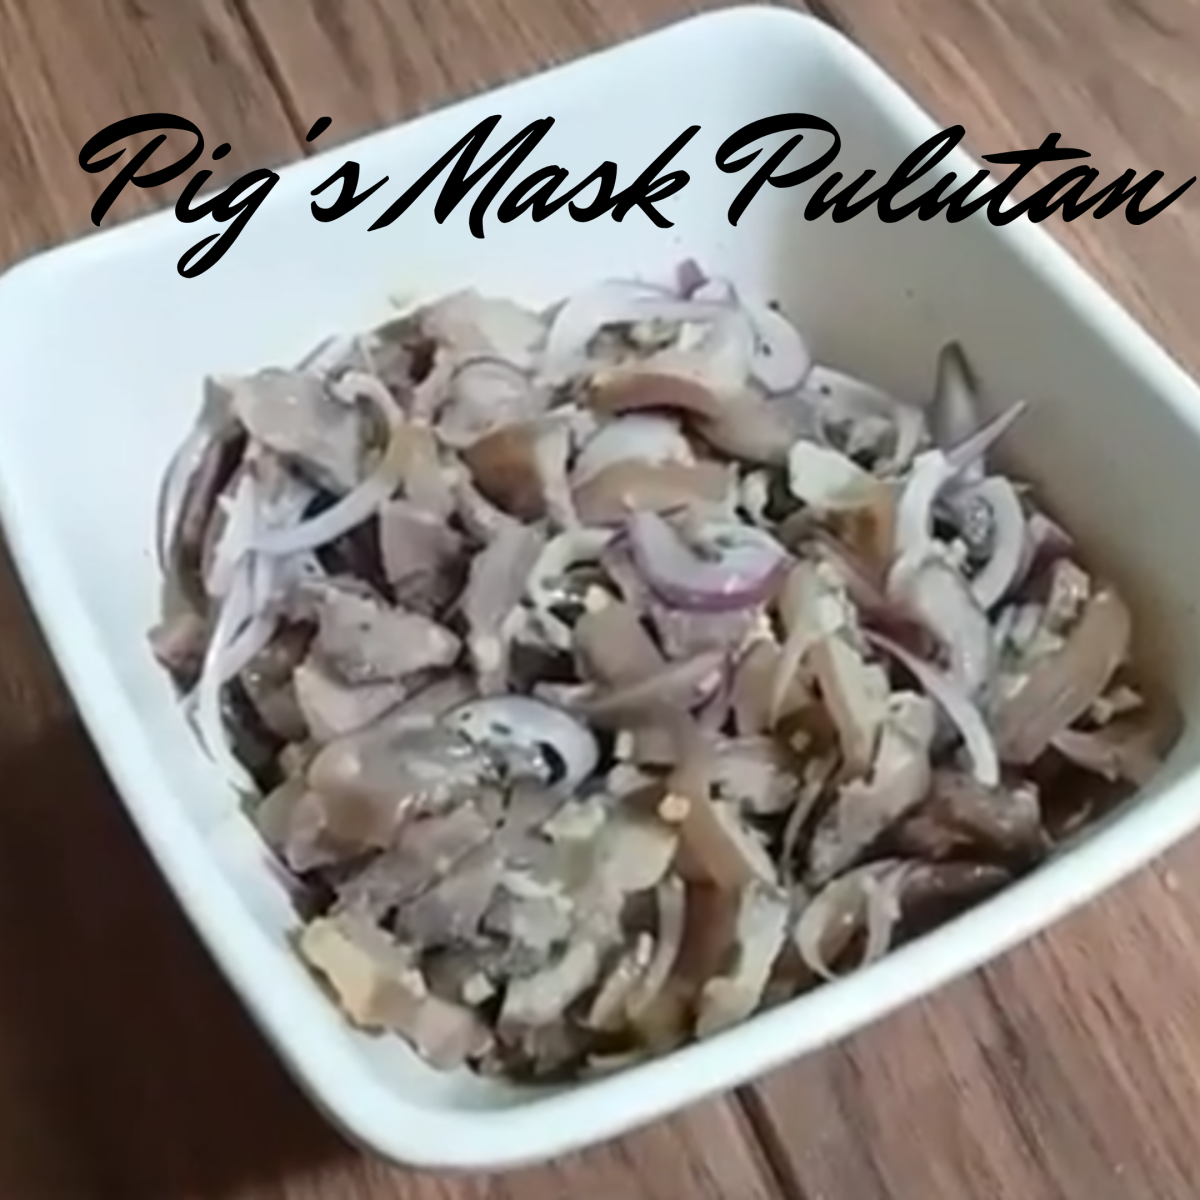 how to cook pig's mask pulutan